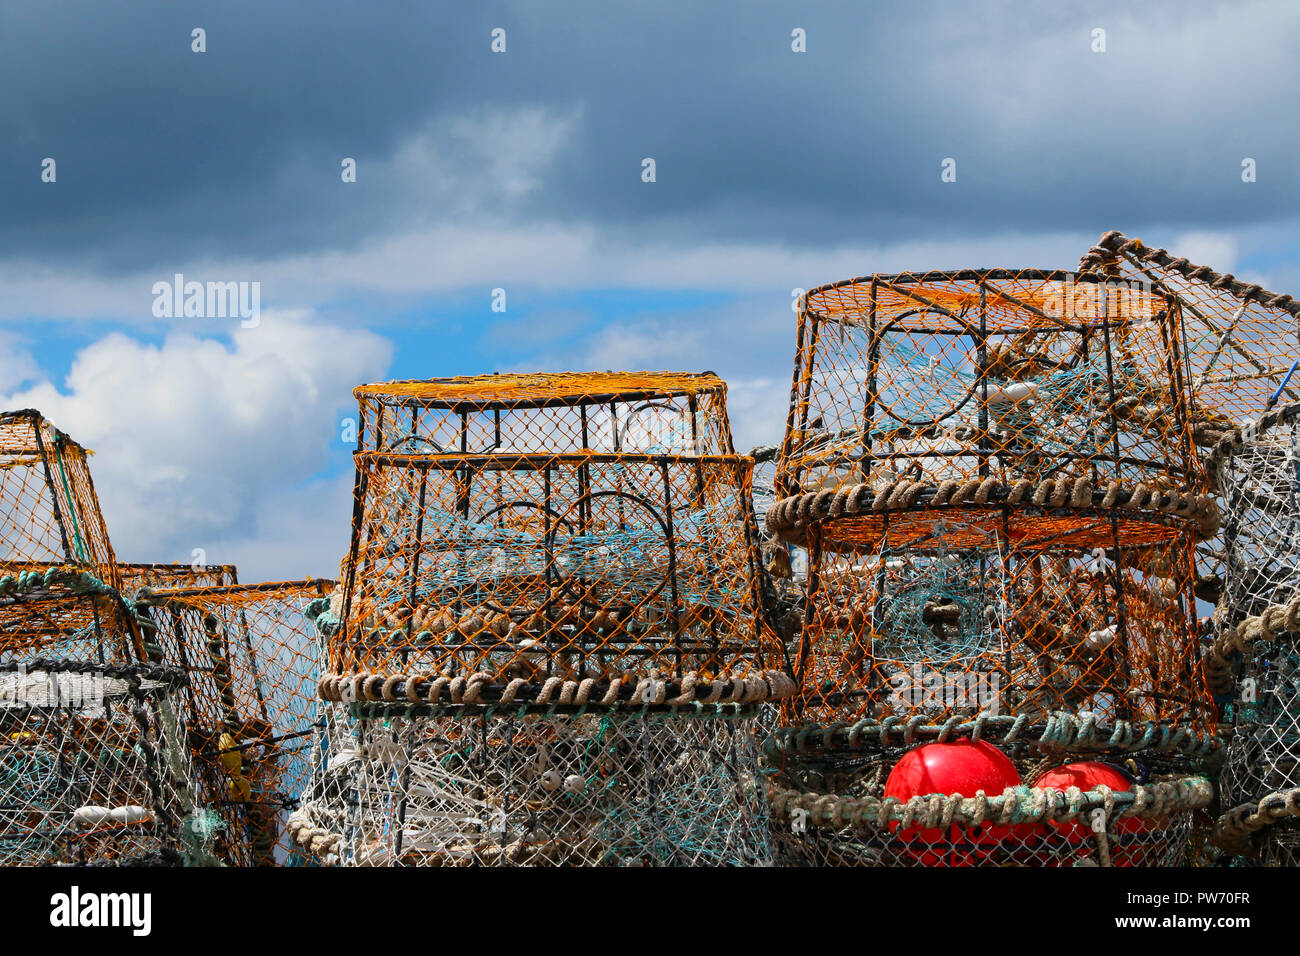 A pile of lobster / crab pots on the quayside at Newquay harbour, Cornwall, England, UK Stock Photo